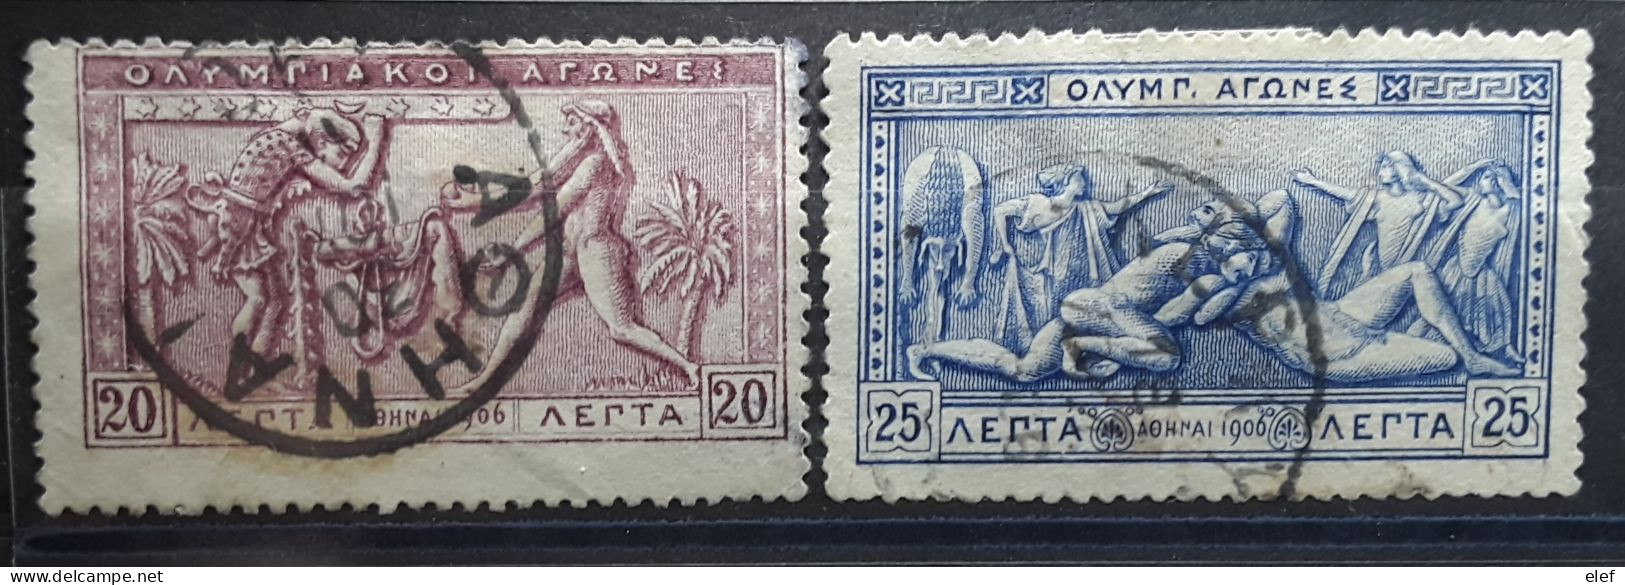 GRECE GREECE 1906, Jeux Olympiques OLYMPICS ATHENS 2 Timbres , Yvert 170  + 171 ,  Obl  TB - Usados